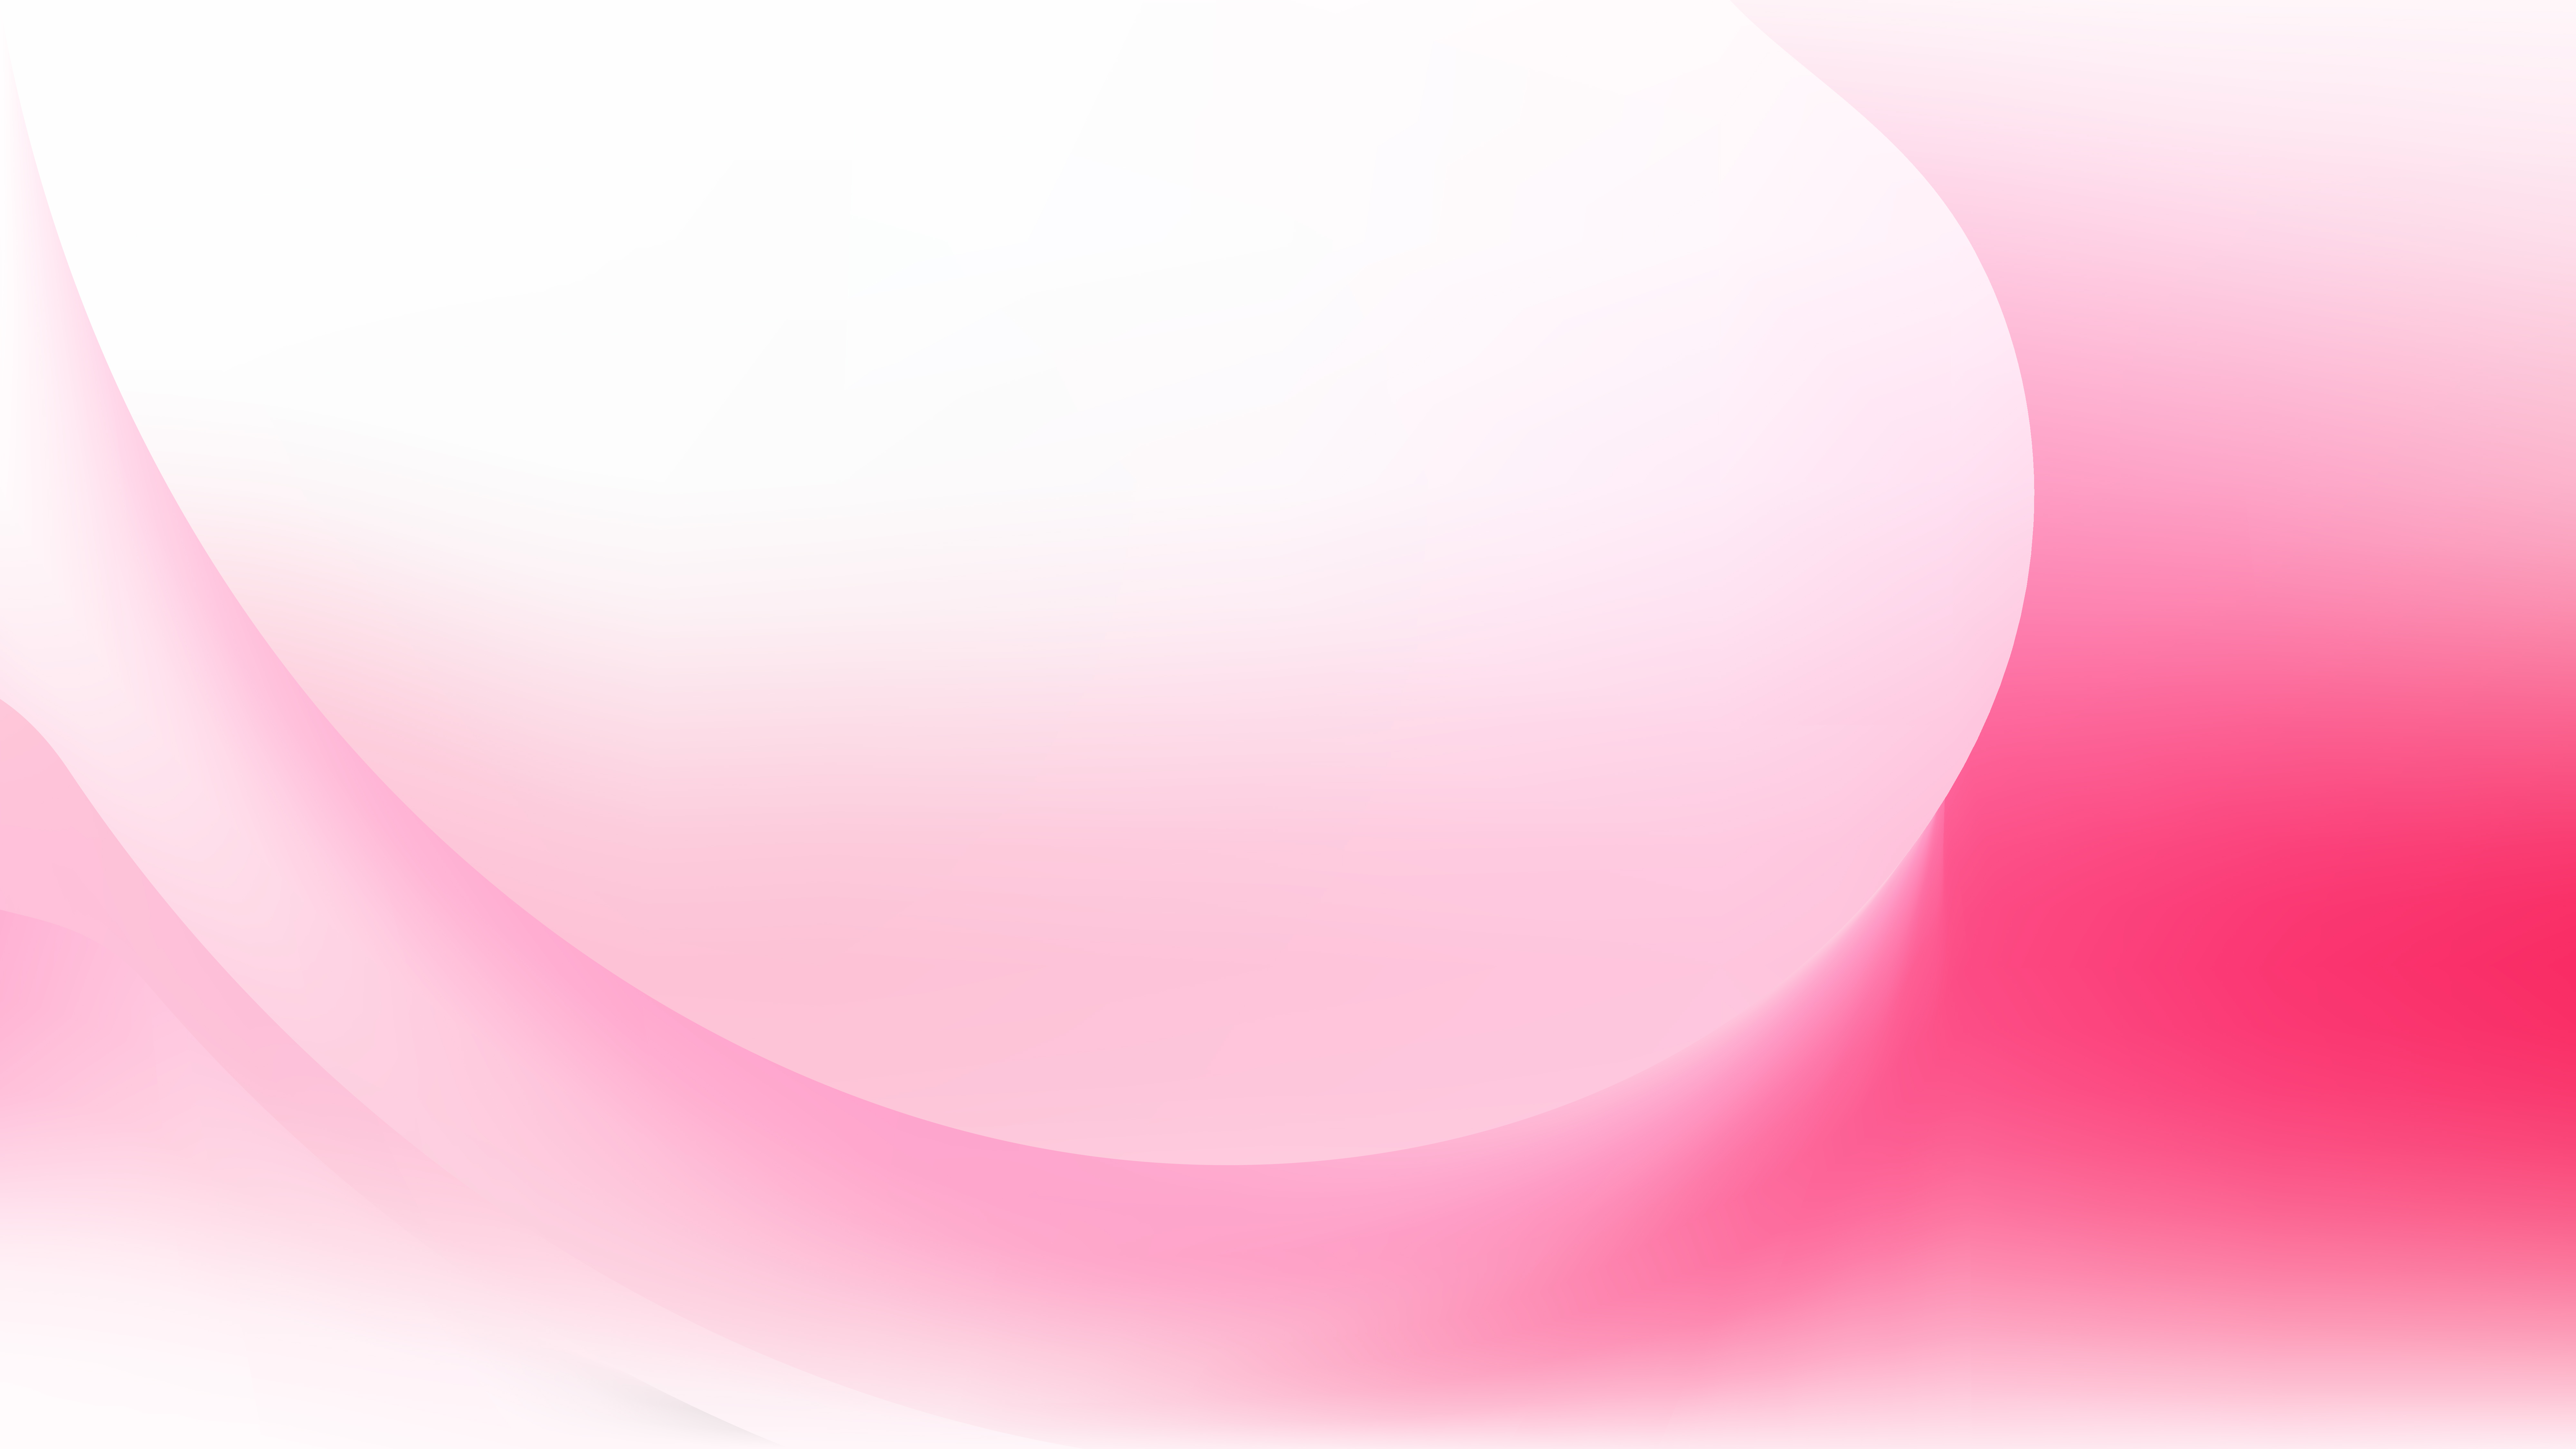 Free Pink and White Background Graphic